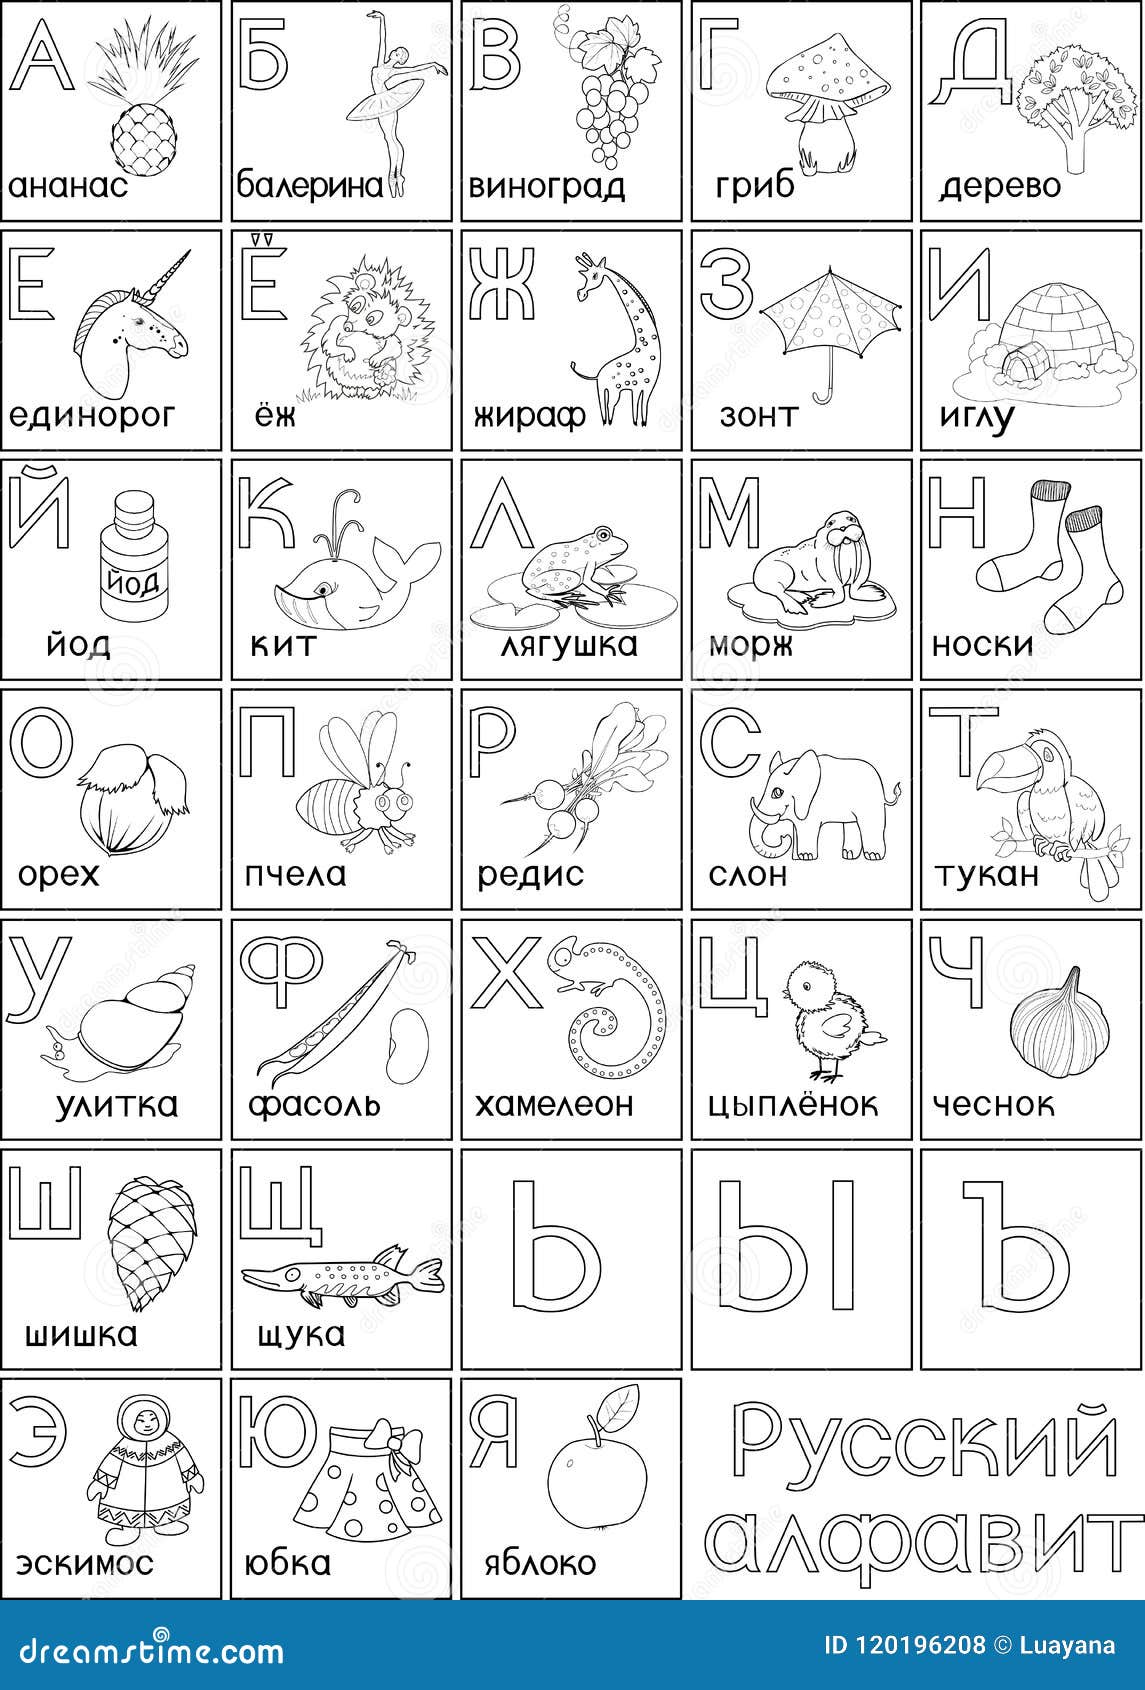 Coloring page russian alphabet with pictures and titles for children education stock vector